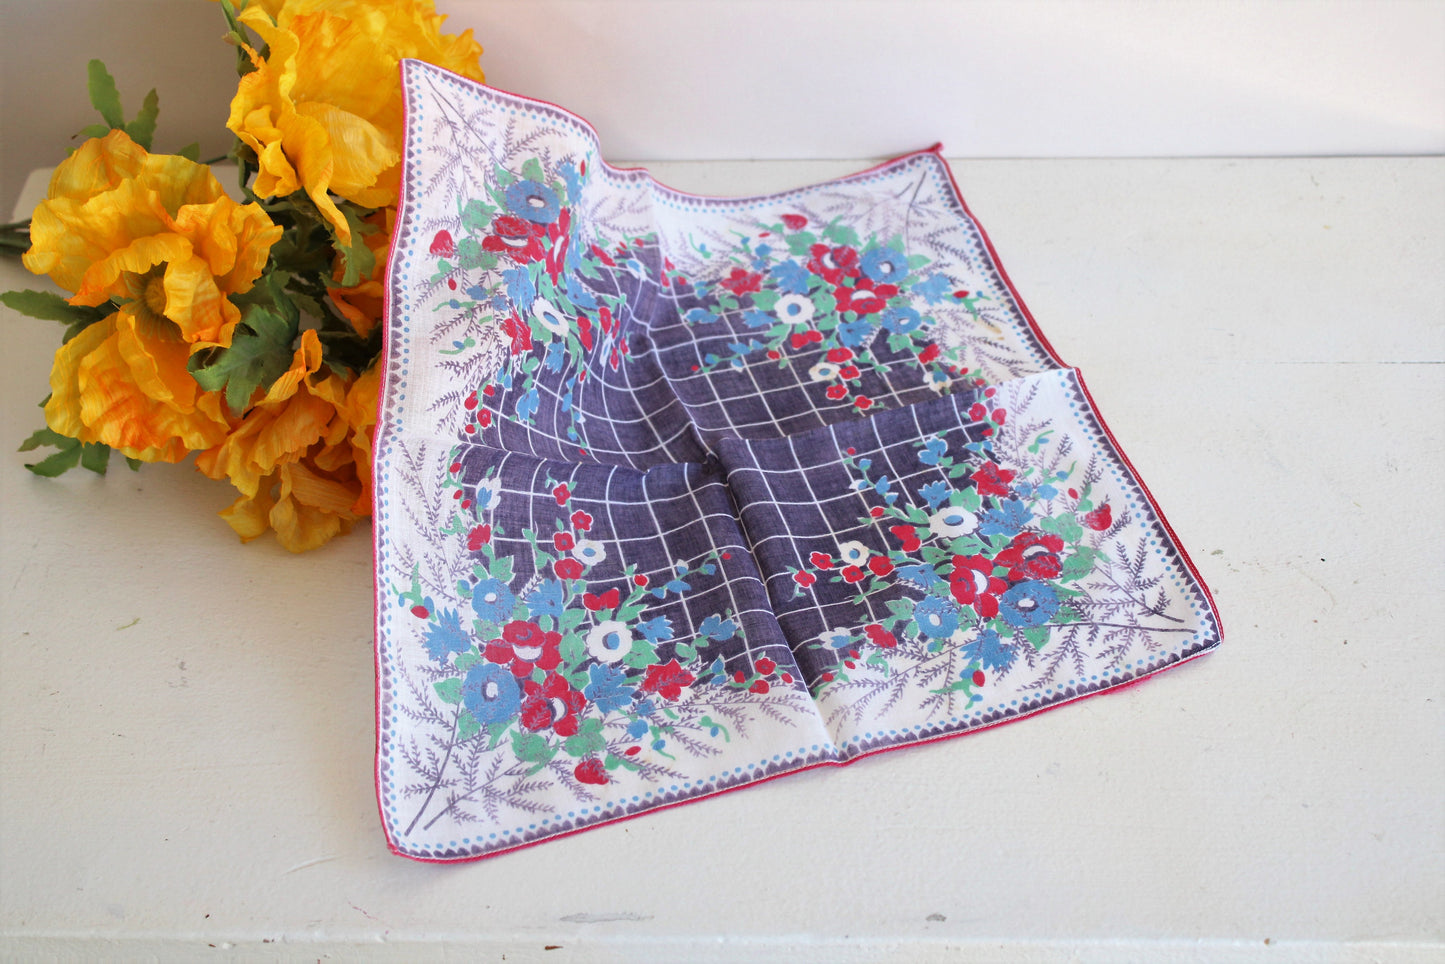 Vintage 1940s Hanky With Windowpane and Floral Print